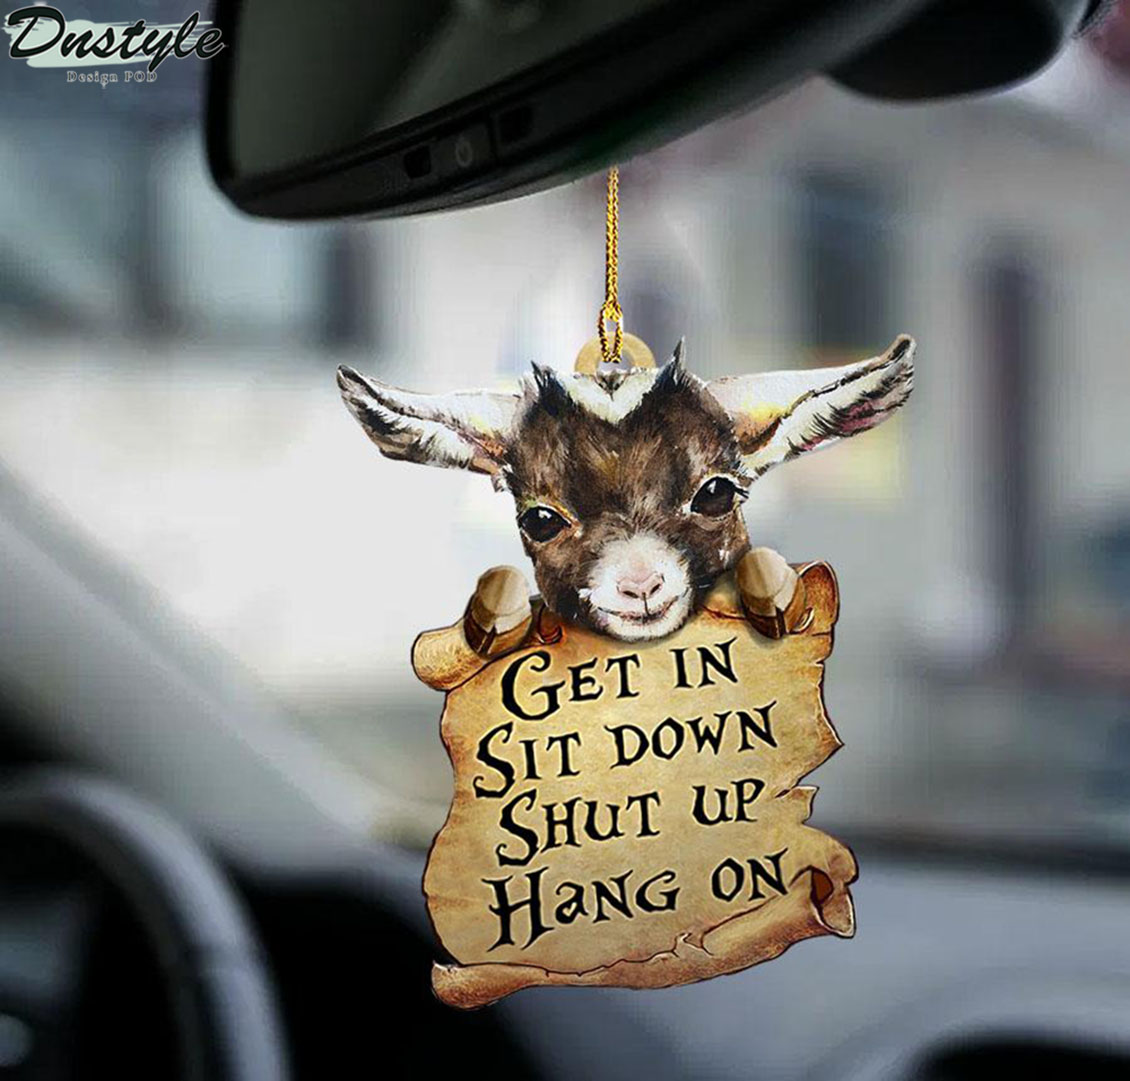 Goat get in sit down shut up hang on ornament 1